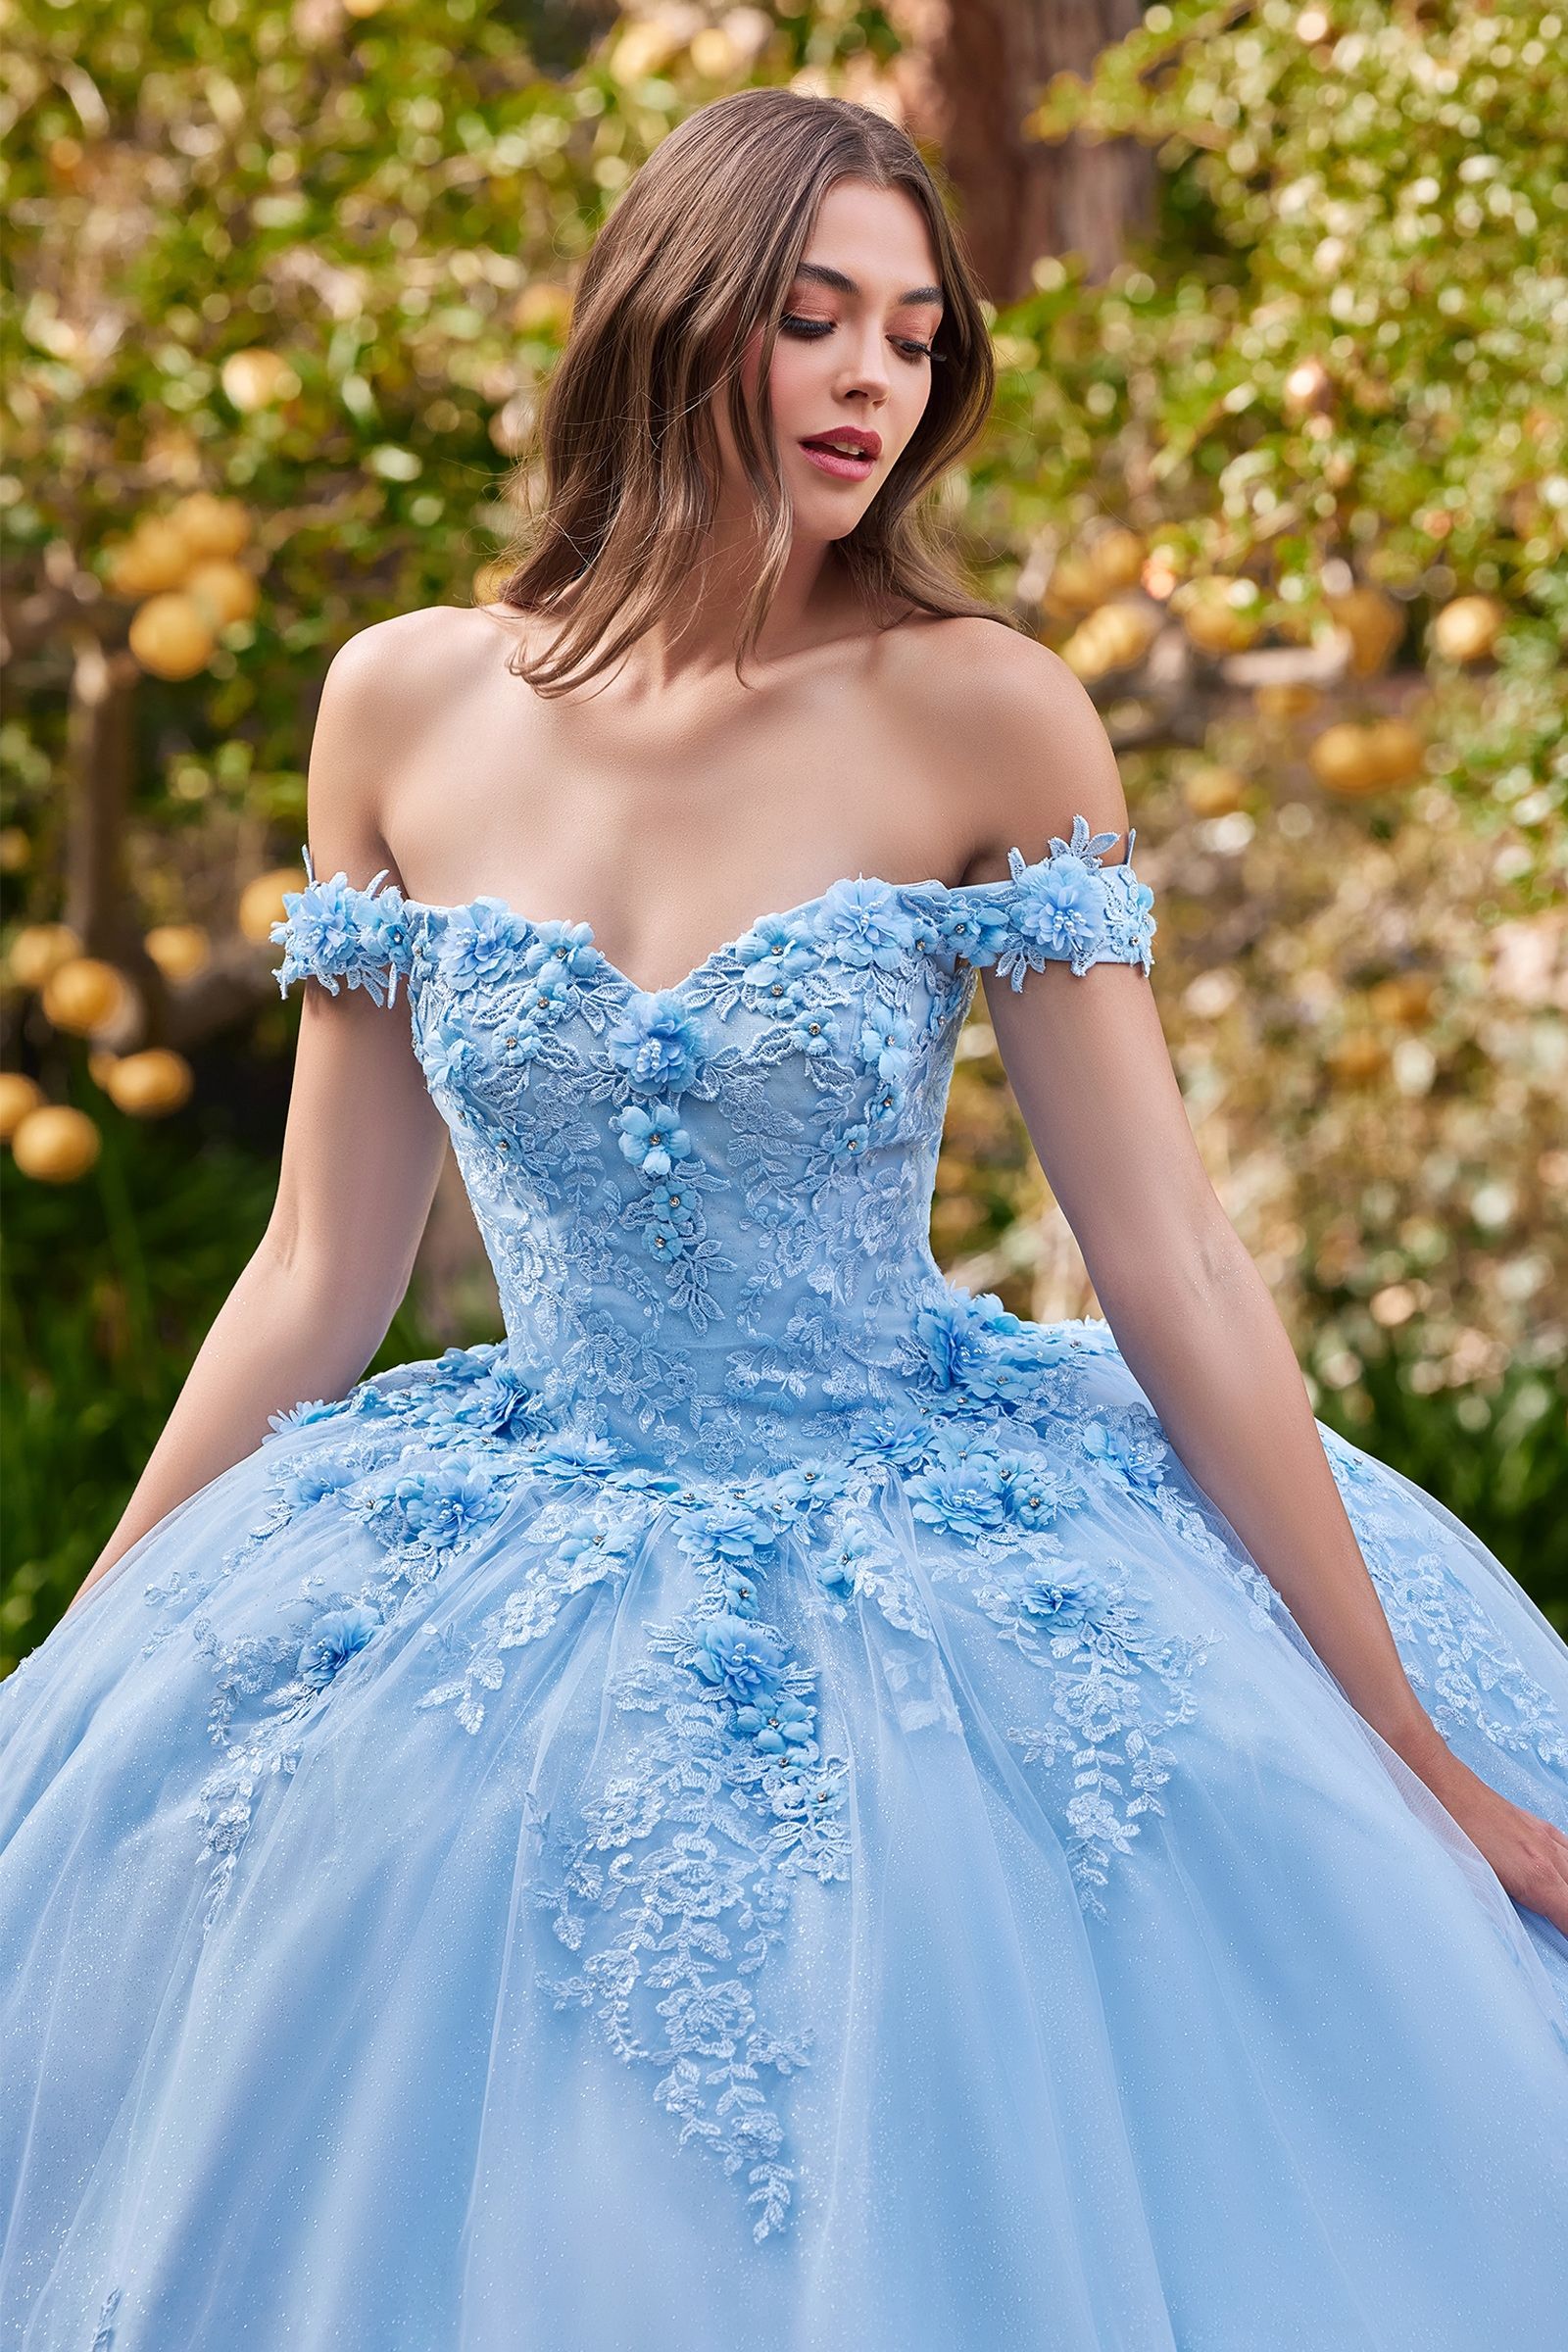 Ladivine 9315 Size 10 Light Blue Long Layered Tulle Ballgown Sheer Lace  Corset Prom Dress off the shoulder